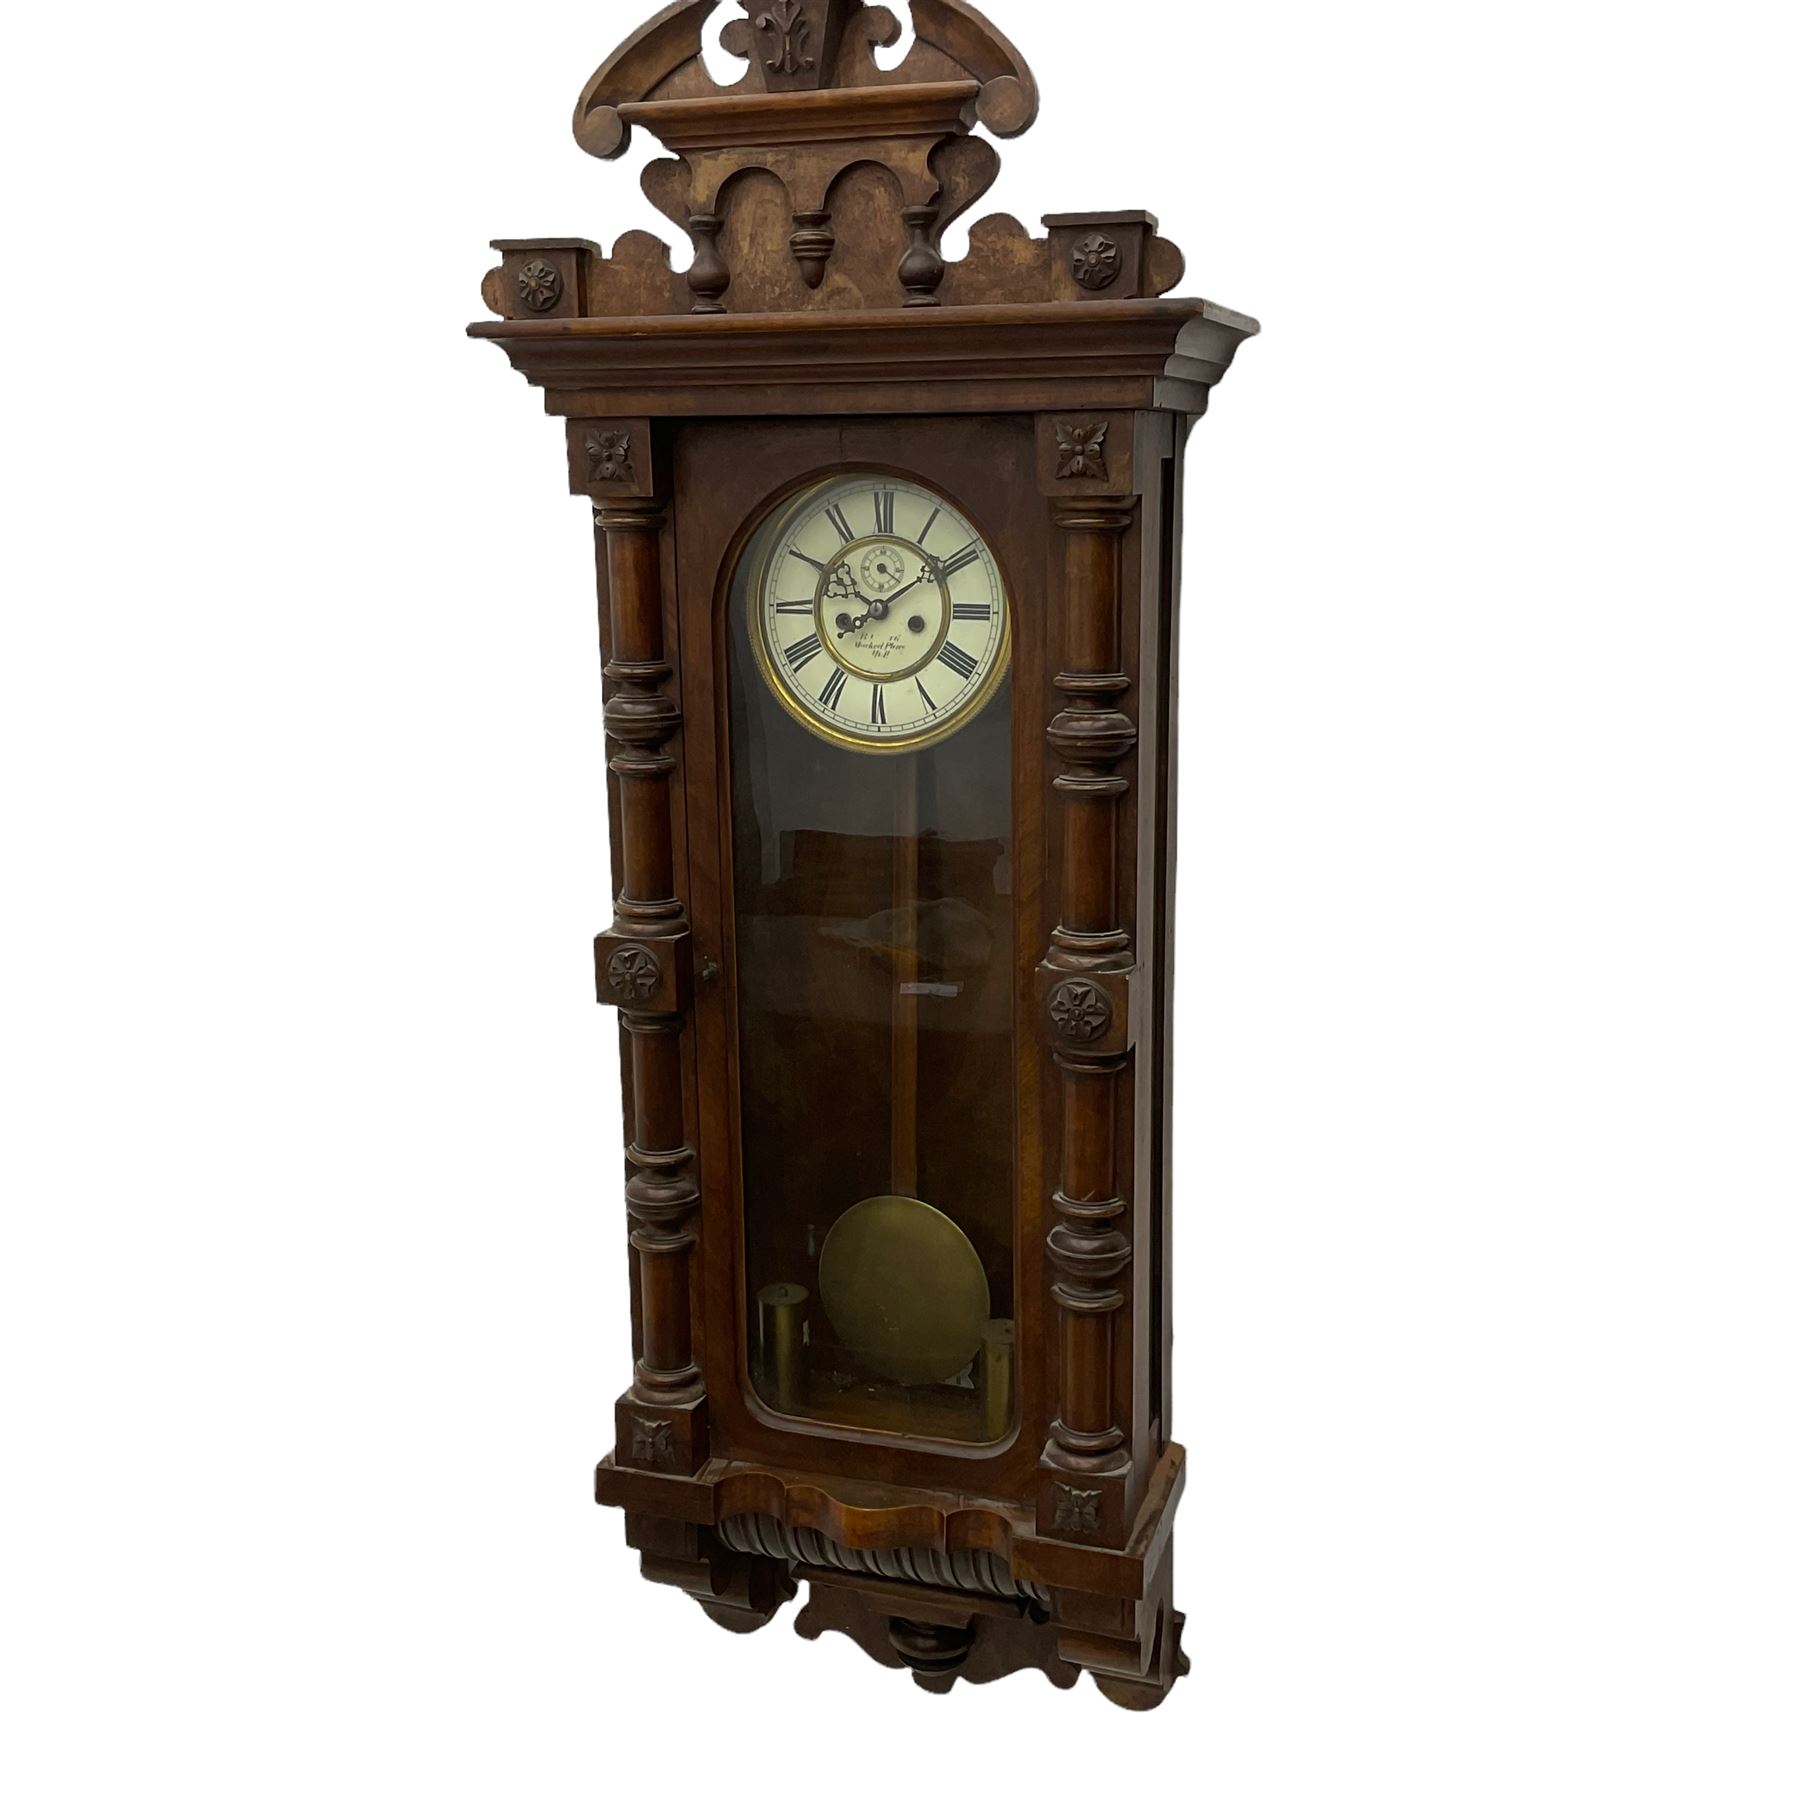 A large German wall clock c 1890 with a twin weight striking movement